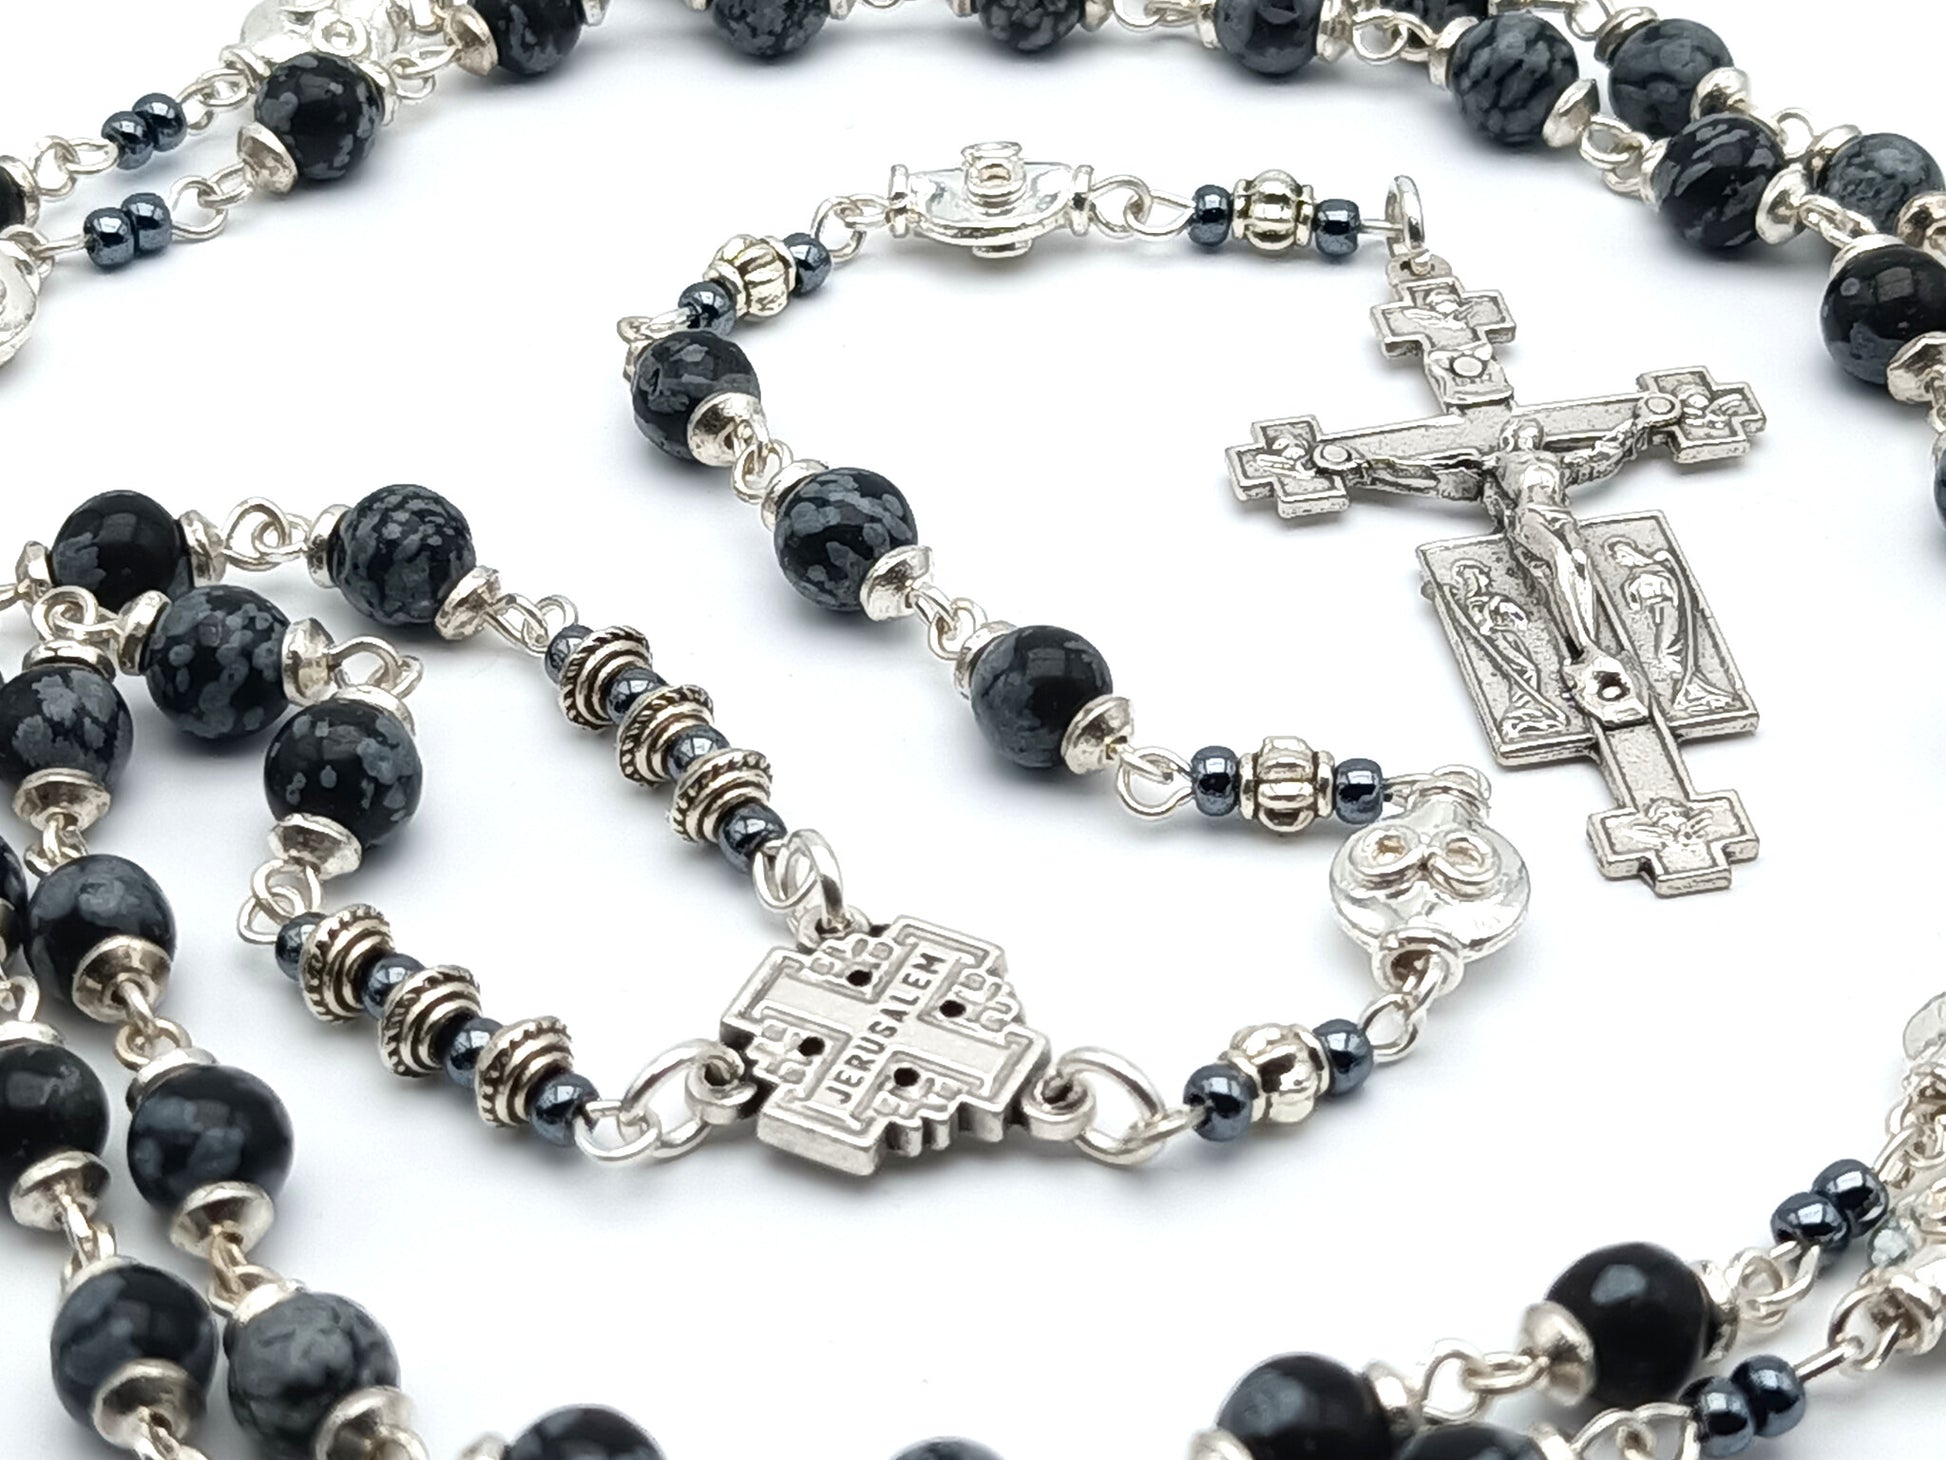 Jerusalem unique rosary beads with alabaster gemstone beads, silver Holy angels crucifix, pater beads and centre medal.